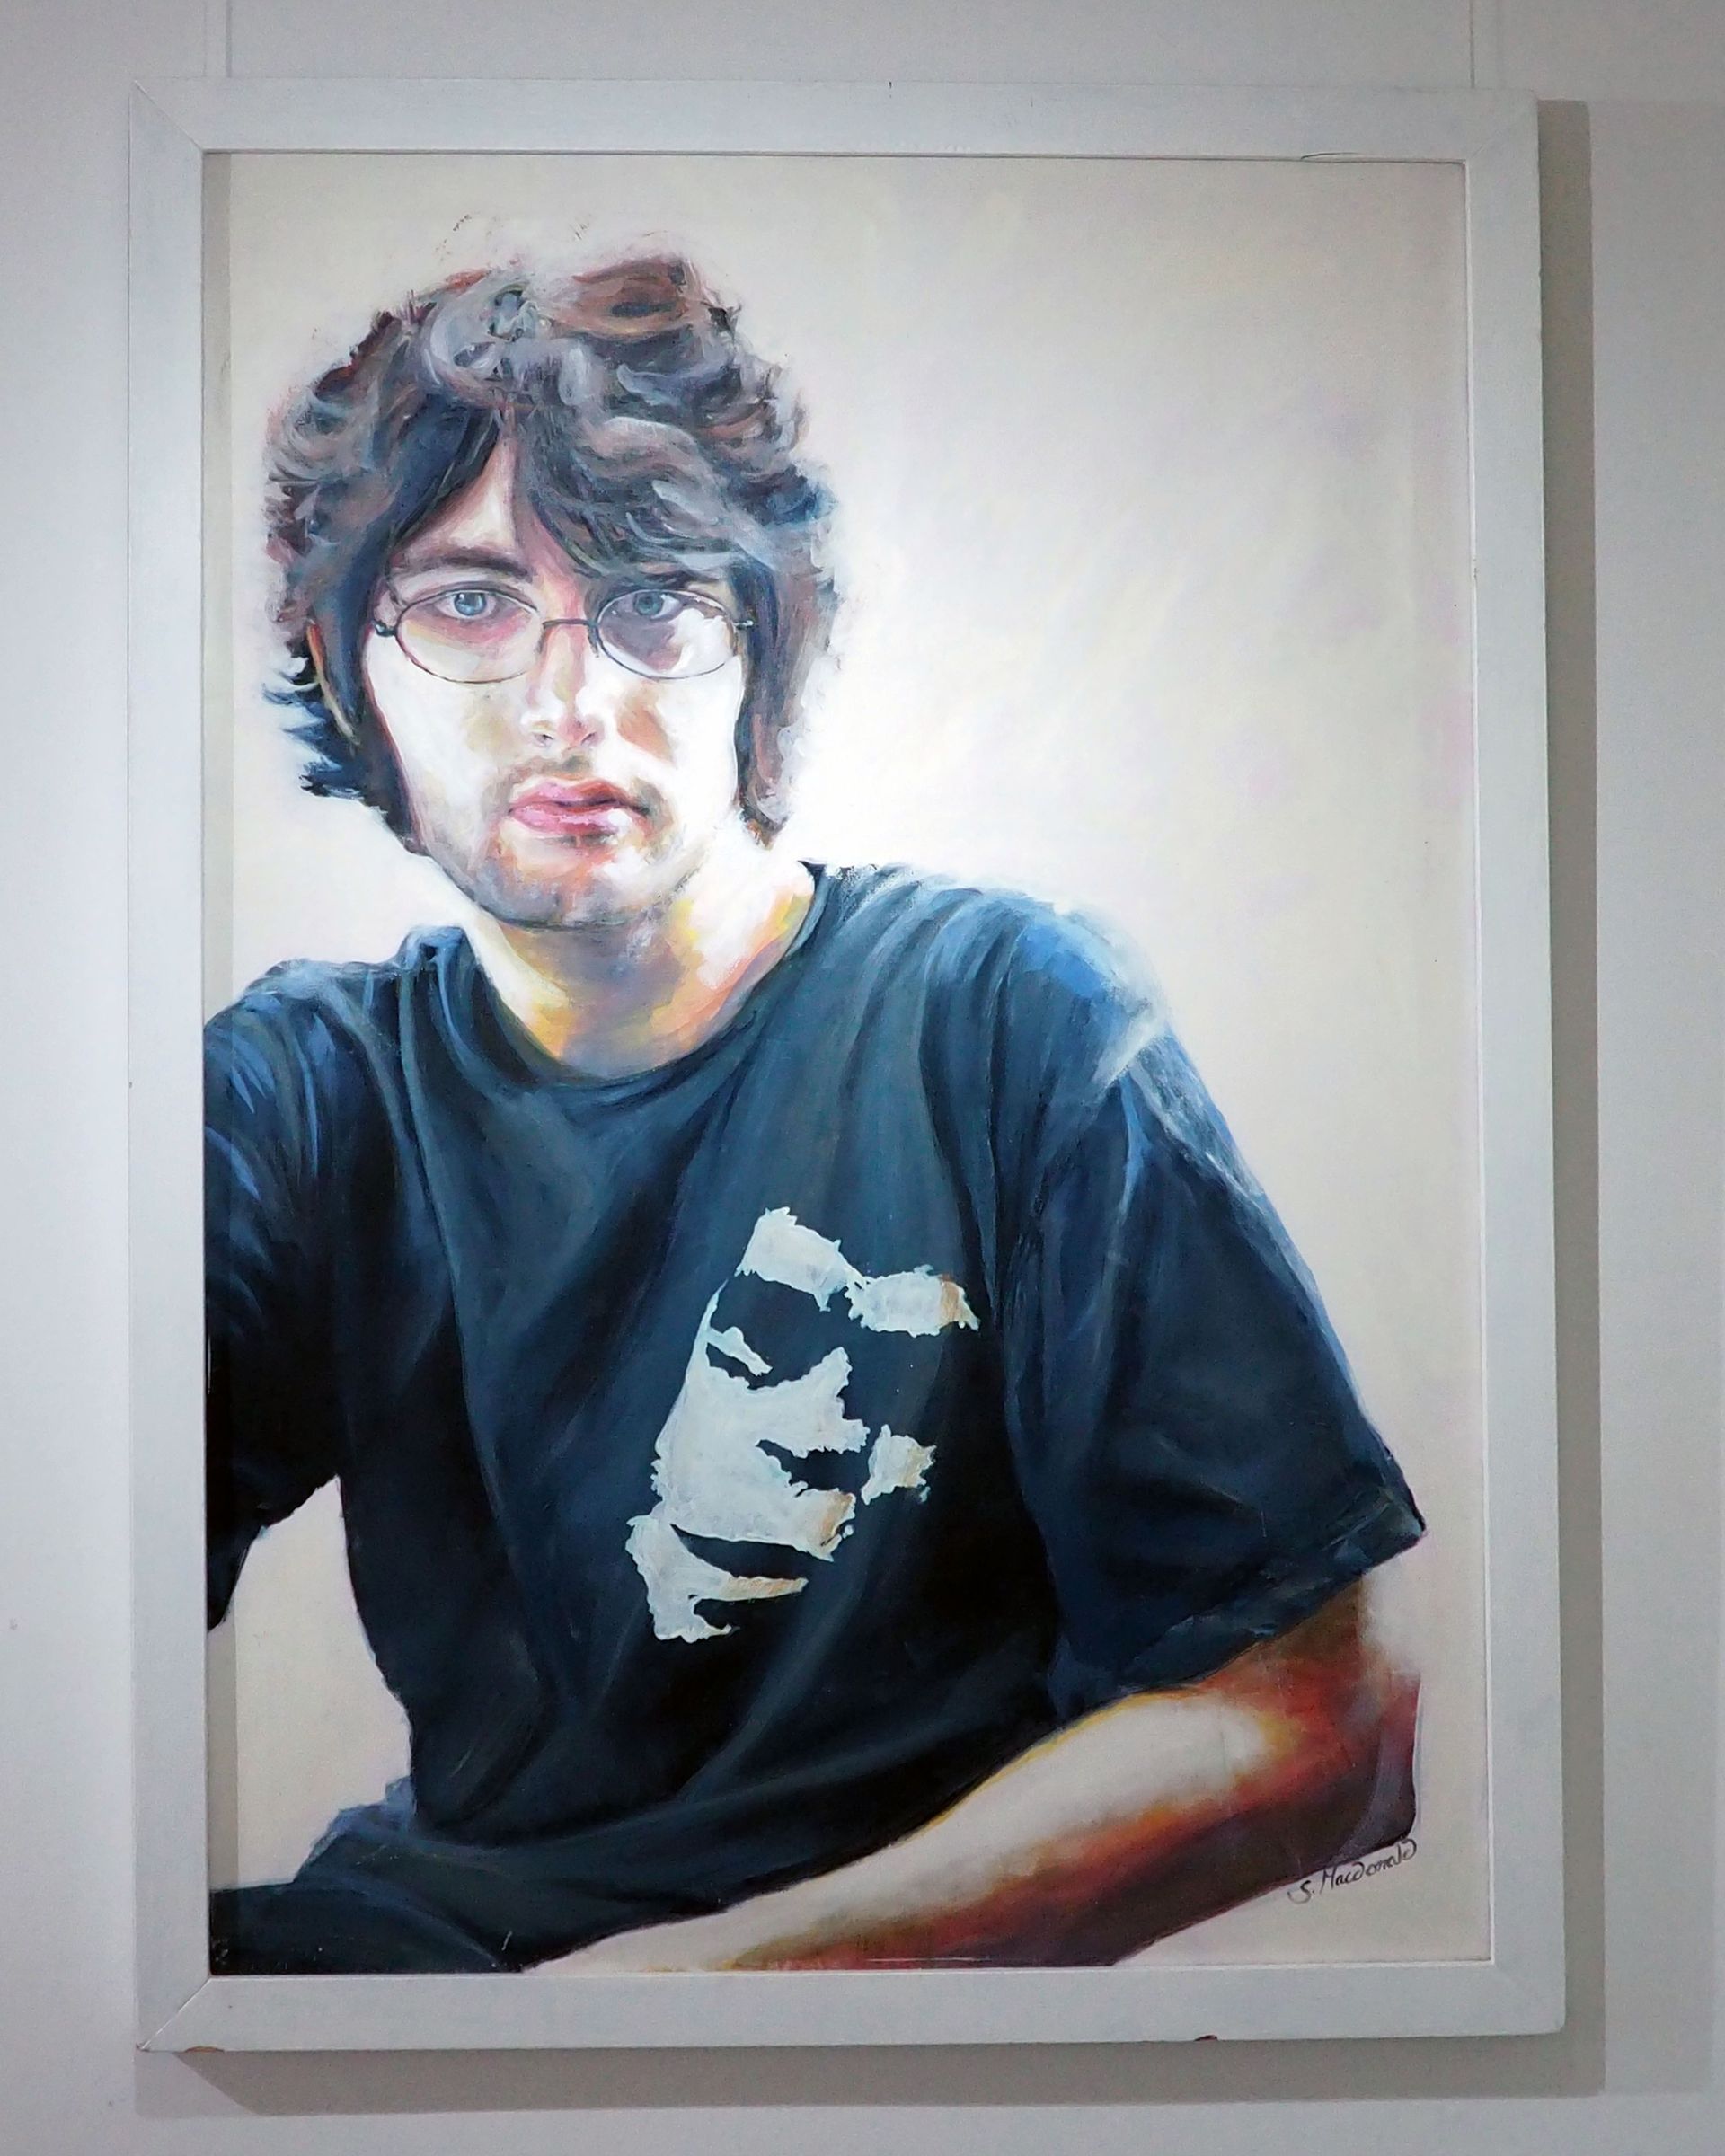 A large portrait of a young man wearing a black T-shirt with a white stencil of a gorilla's face on it. The man has shaggy hair and stares straight forward at the viewer. The background is white, the subject is saturated in this white 'light'.